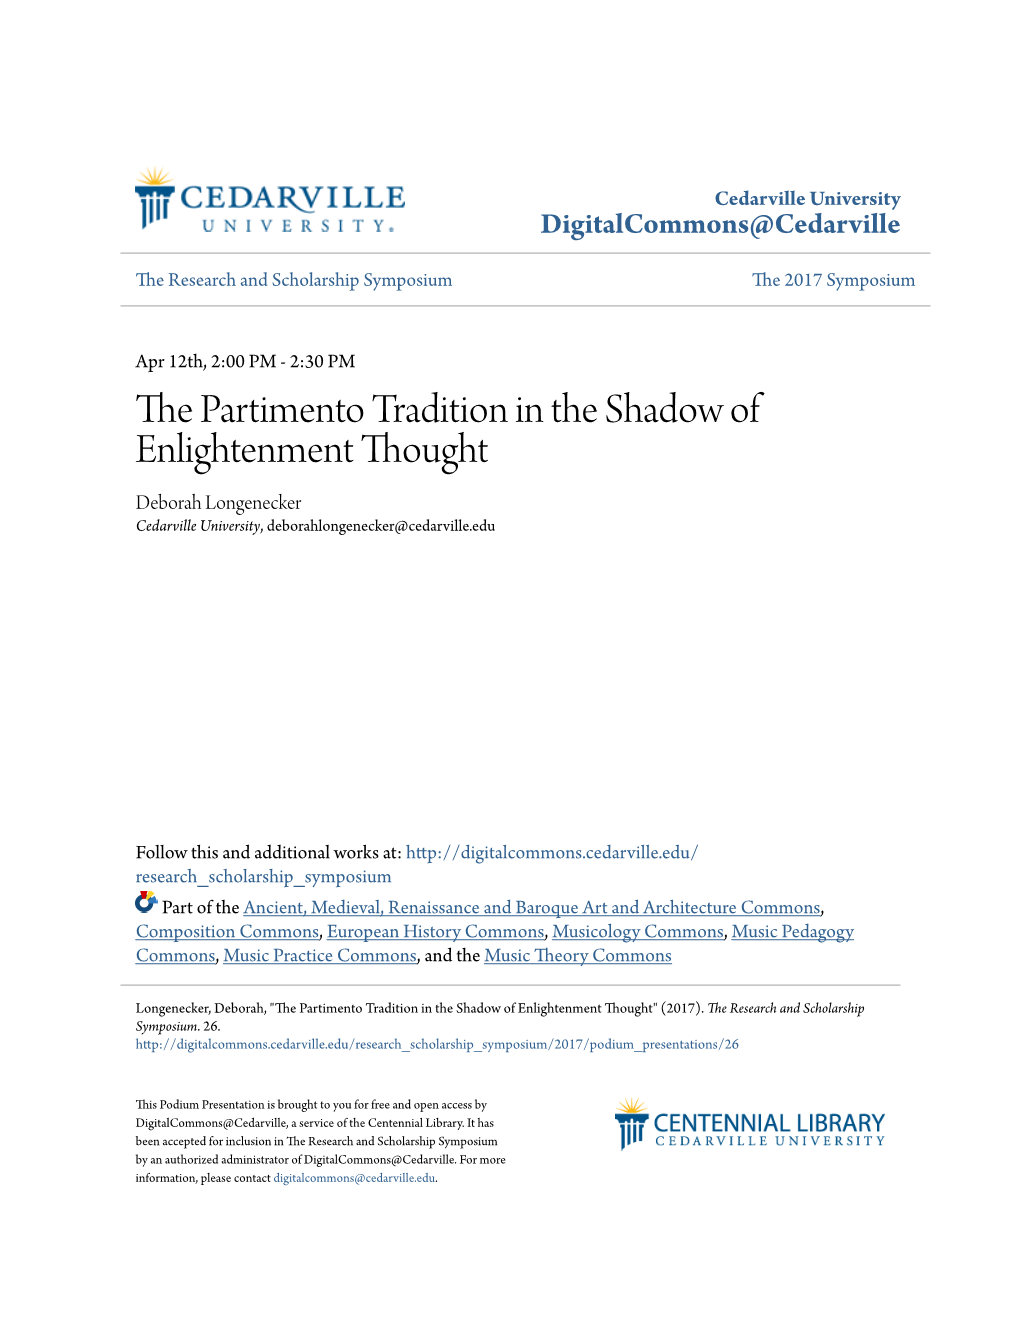 The Partimento Tradition in the Shadow of Enlightenment Thought